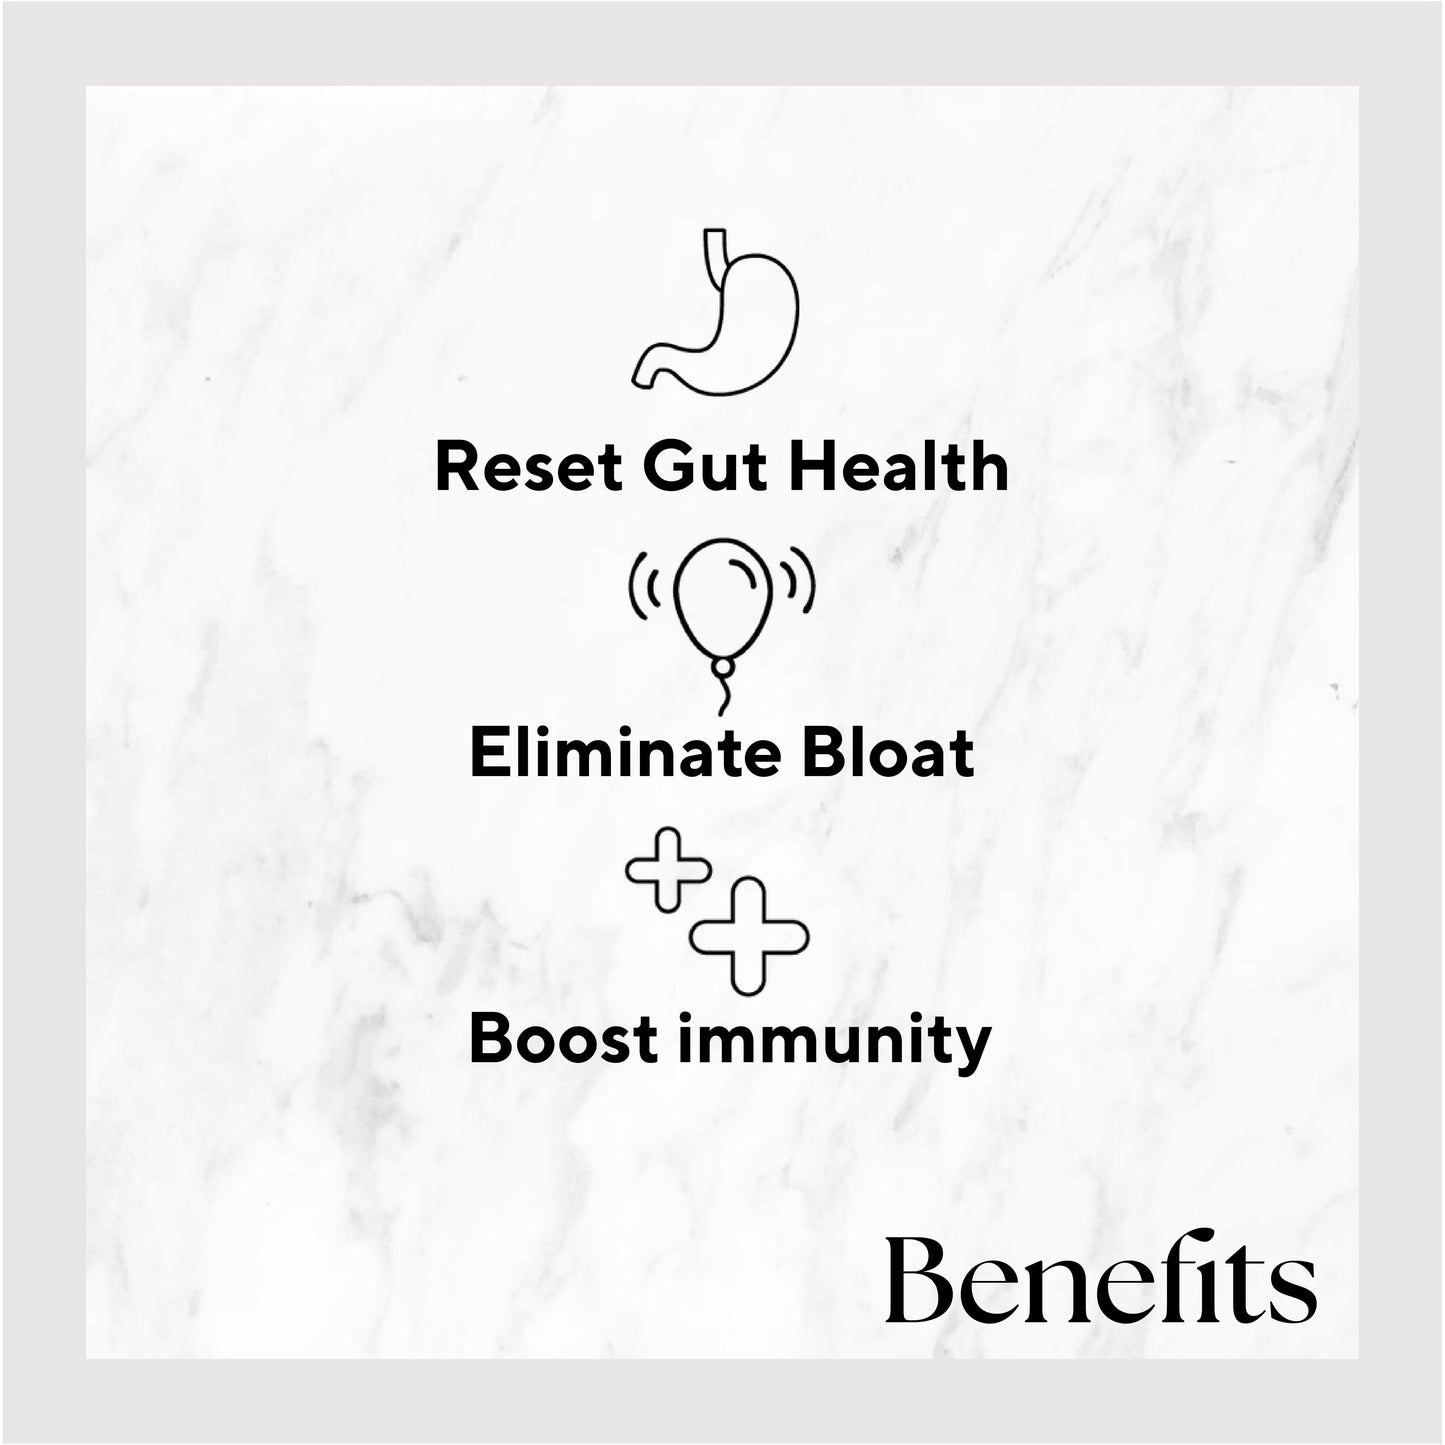 Infographic listing benefits of the product. Benefits include: Reset Gut Health, Eliminate Bloat, and Boost Immunity.